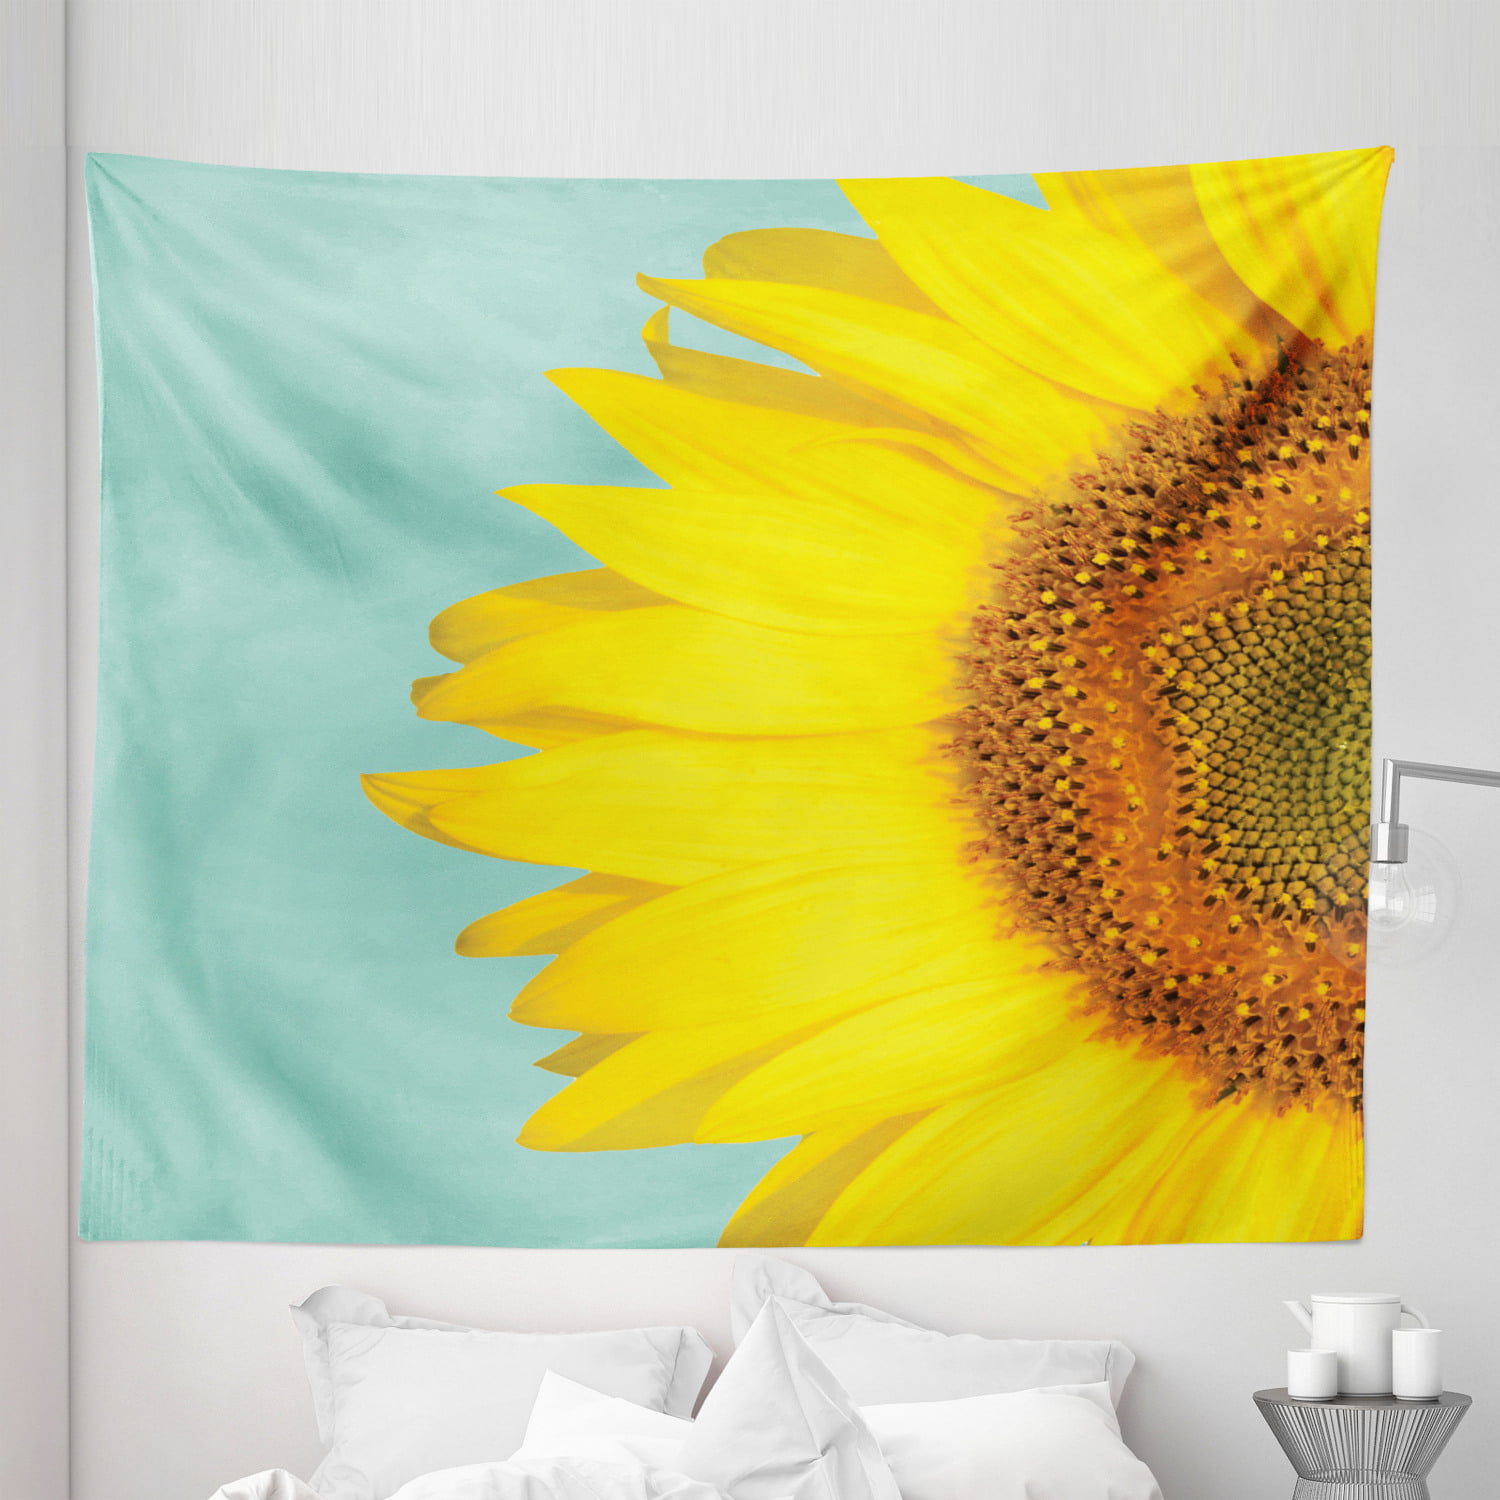 Blooming Sunflower Print Tapestry Room Wall Hanging Art Floral Tapestries Decor